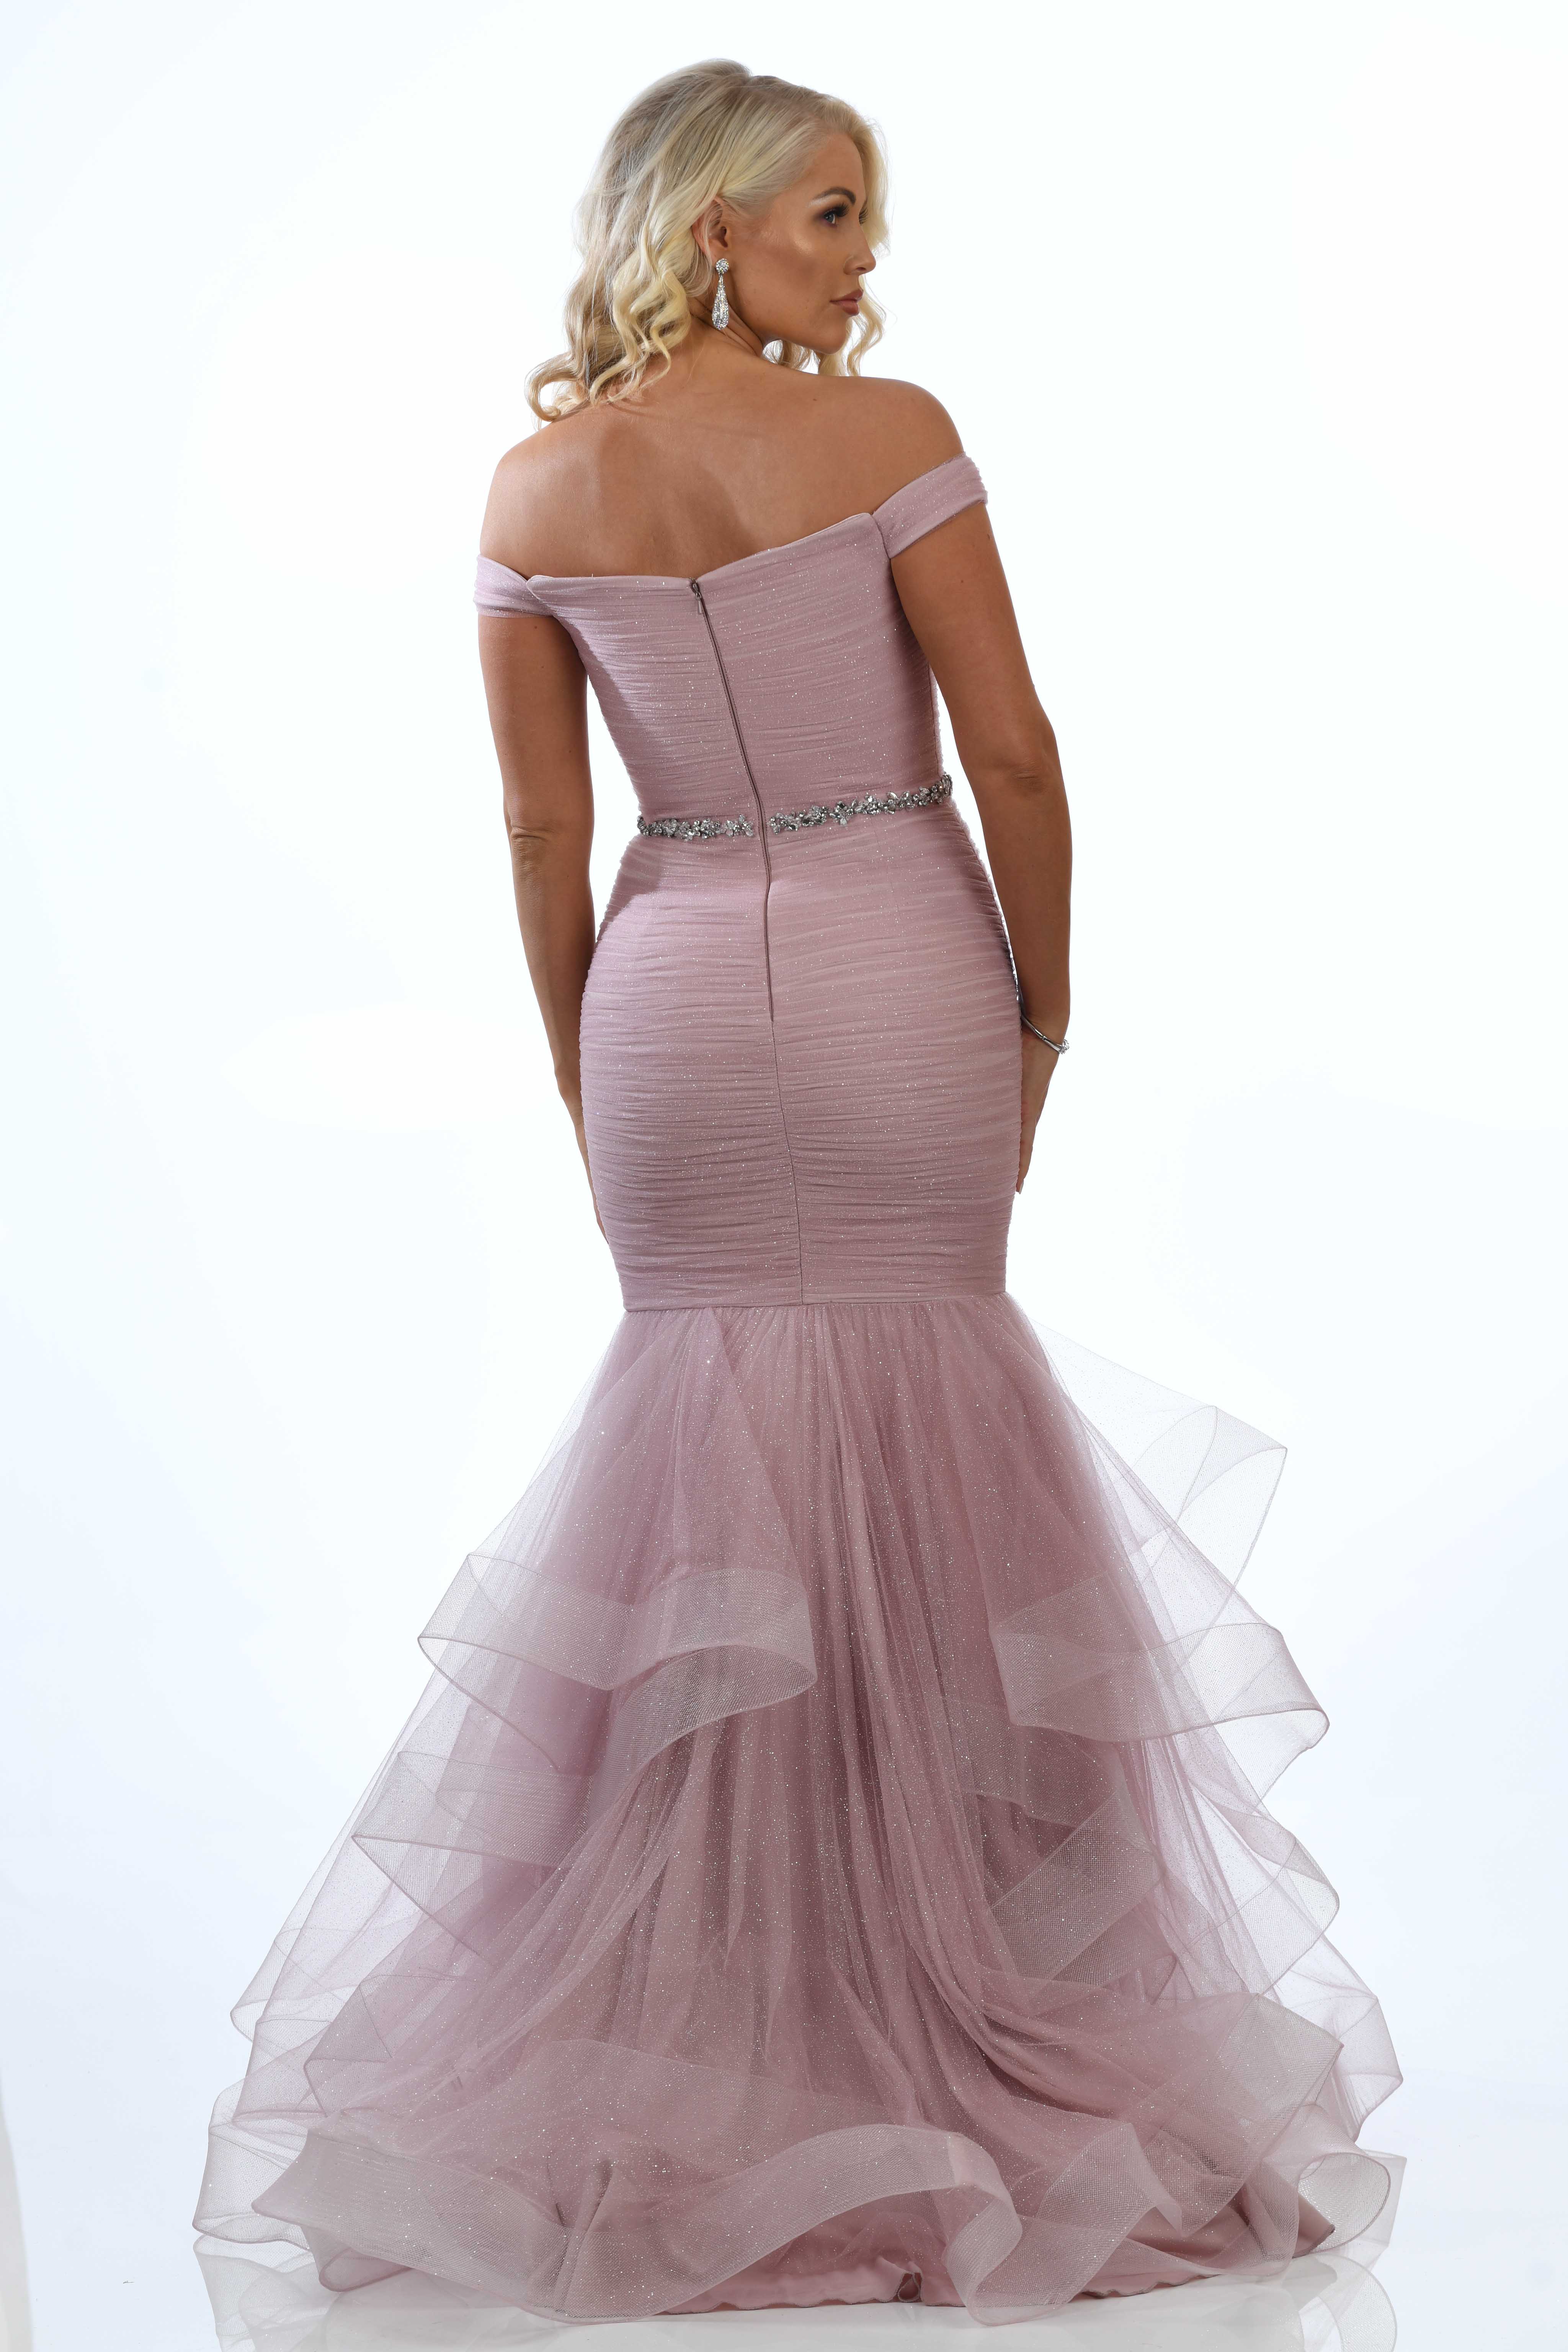 Full length fishtail style dress. AF79531 - Catherines of Partick